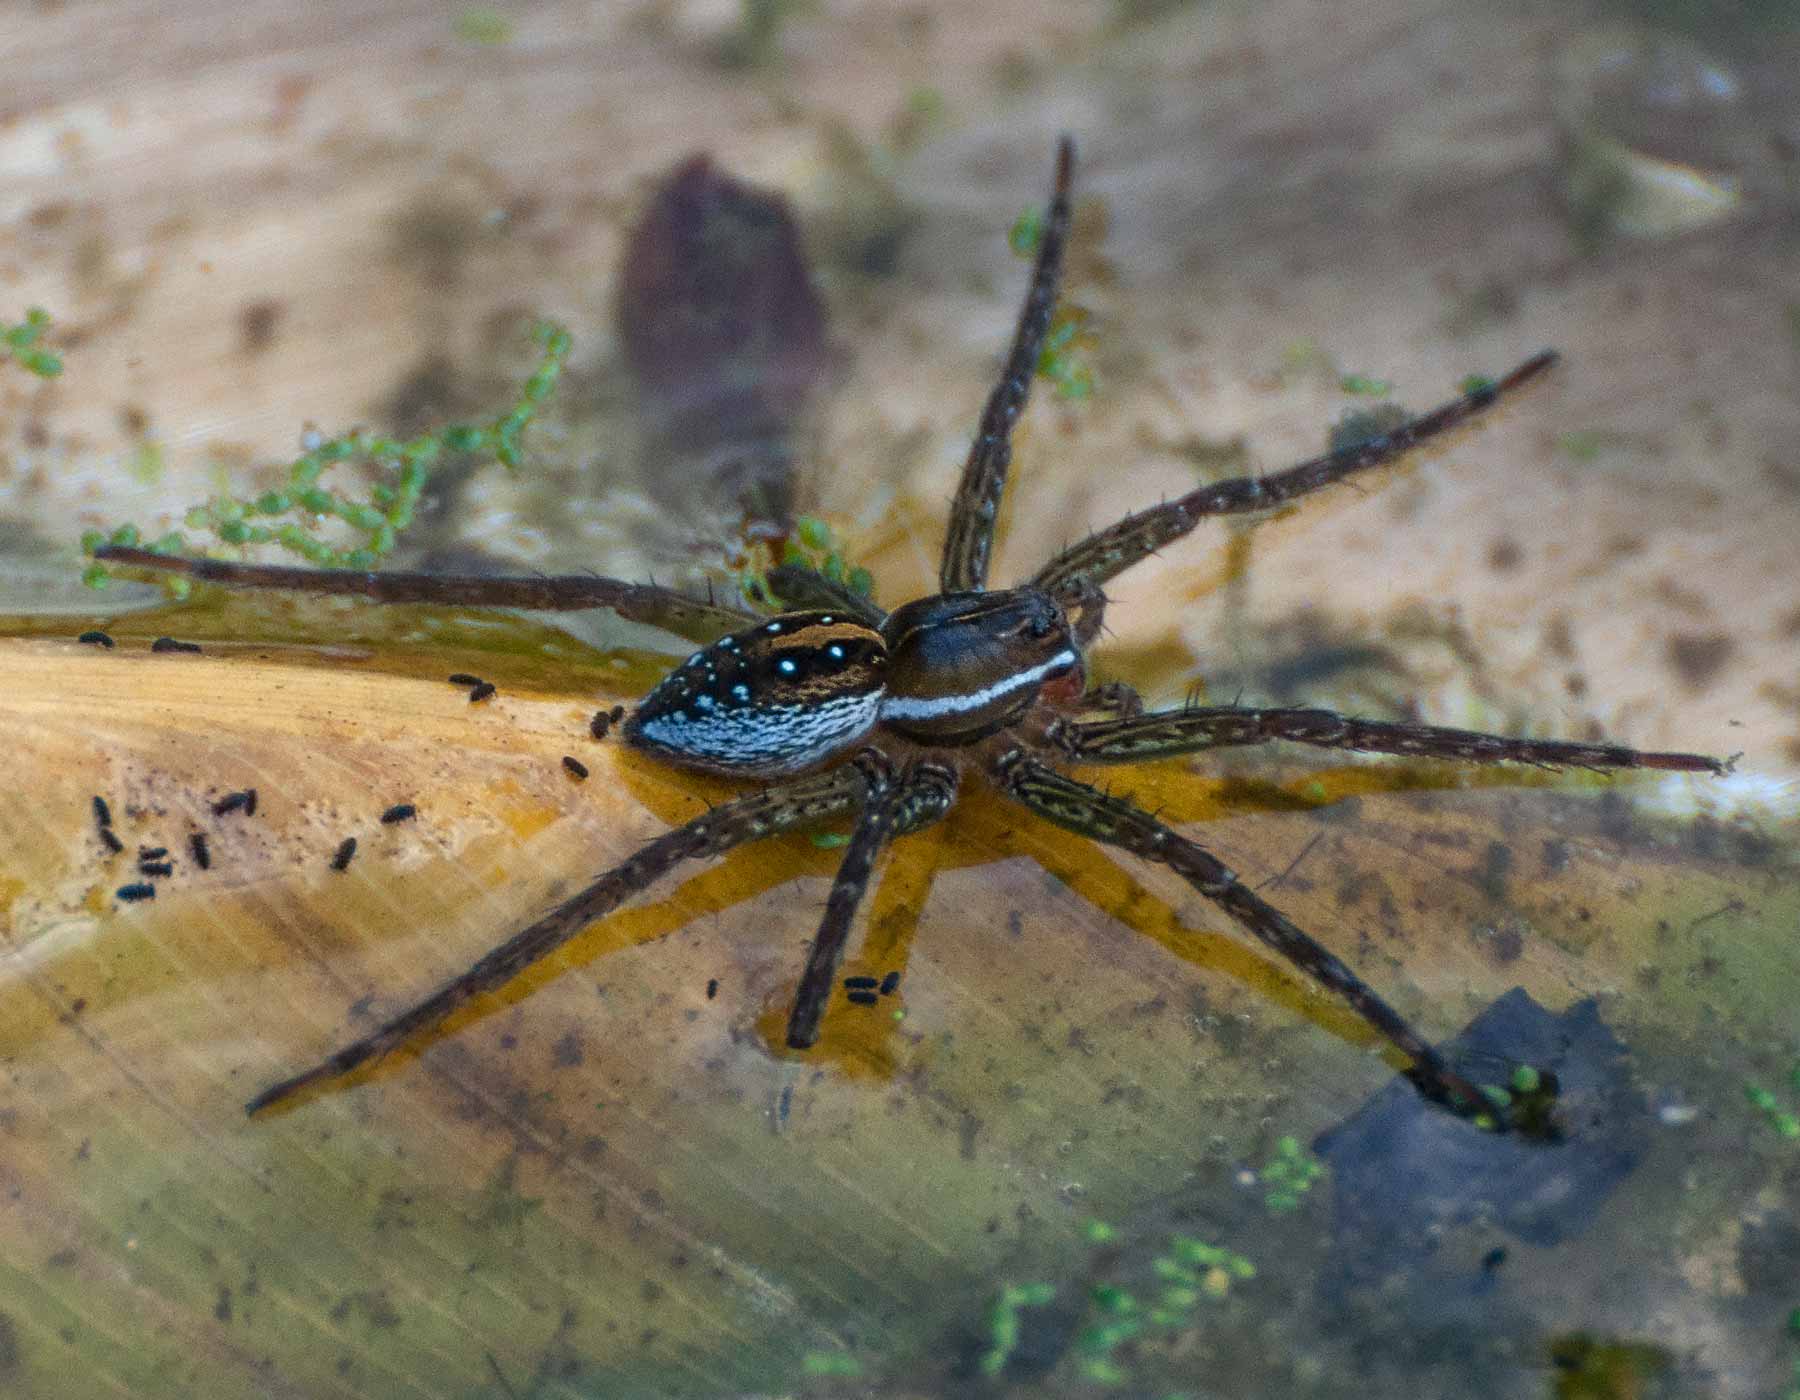 Spotted Fishing Spider Six-Spotted Fishing Spider | MDC Discover Nature